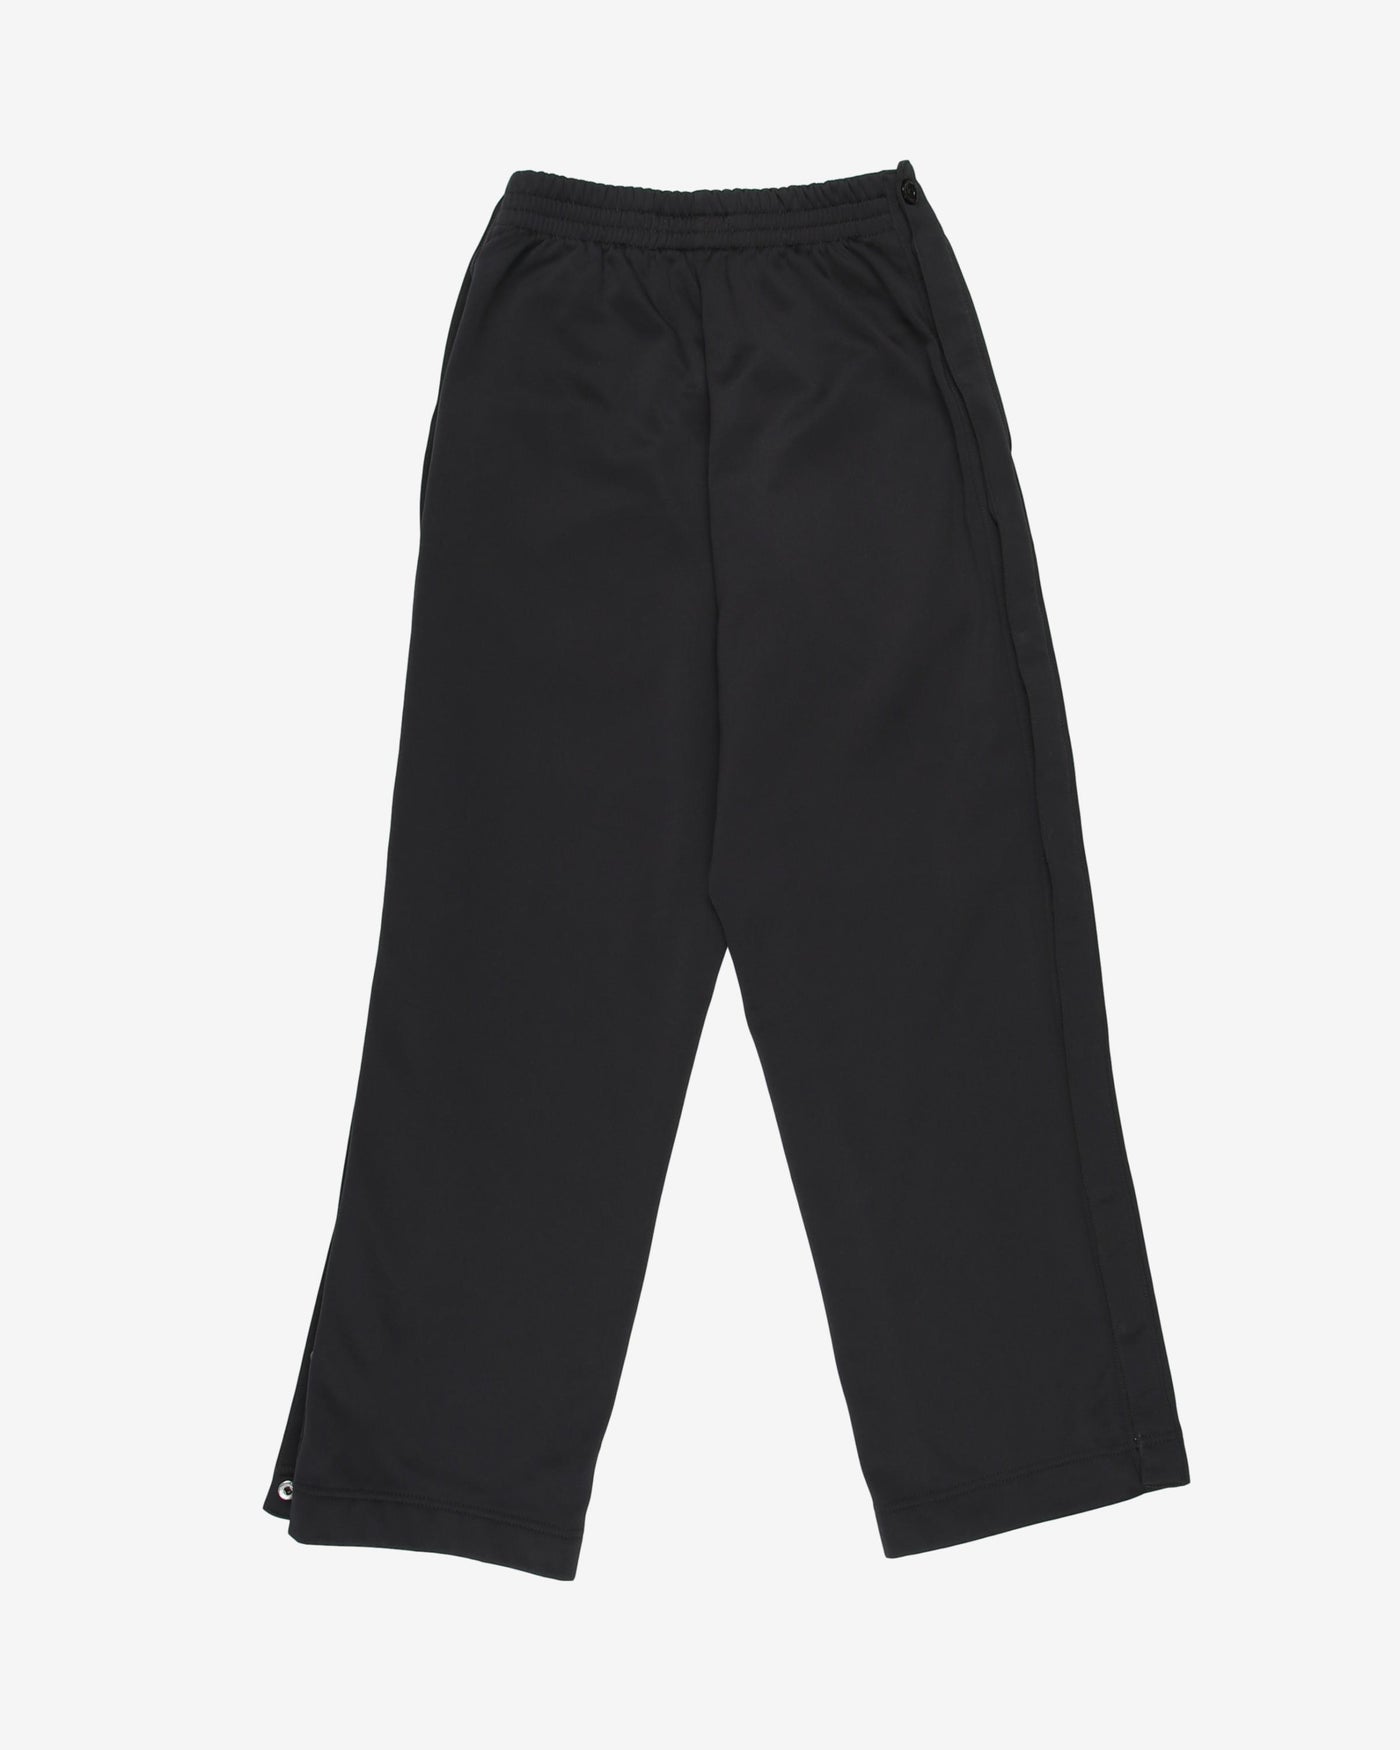 champs grey popper track trousers -xs w24